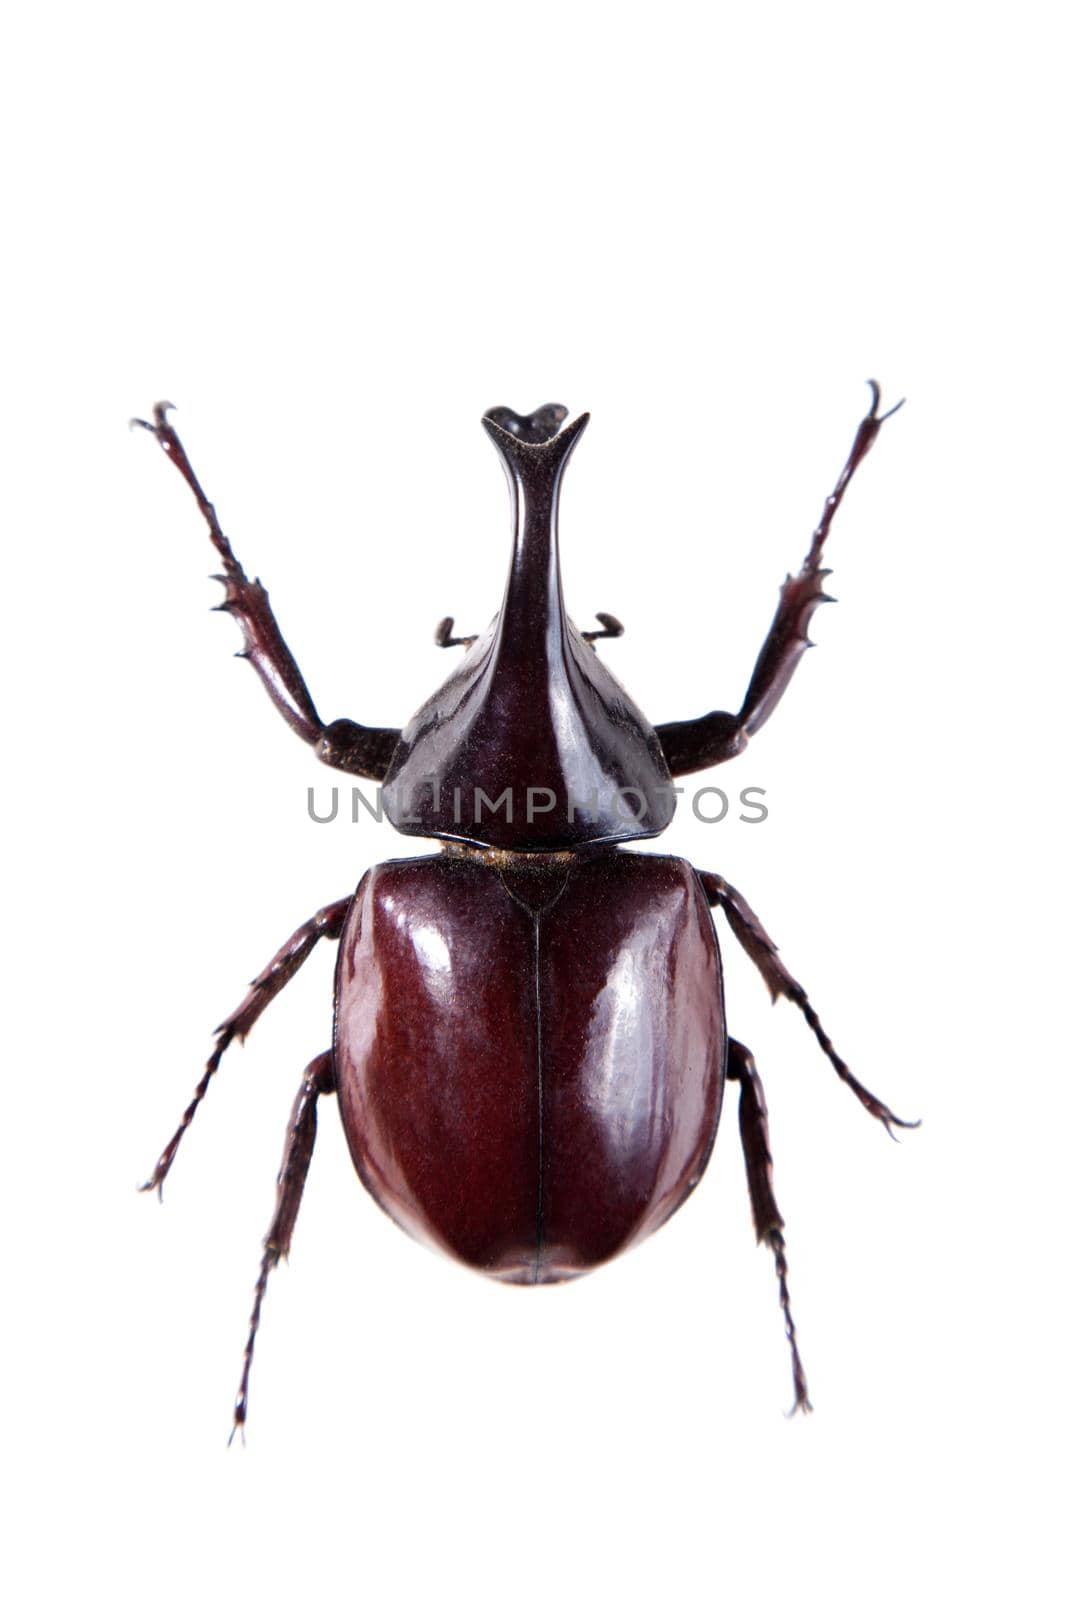 Rhinoceros beetle on the white background by RosaJay